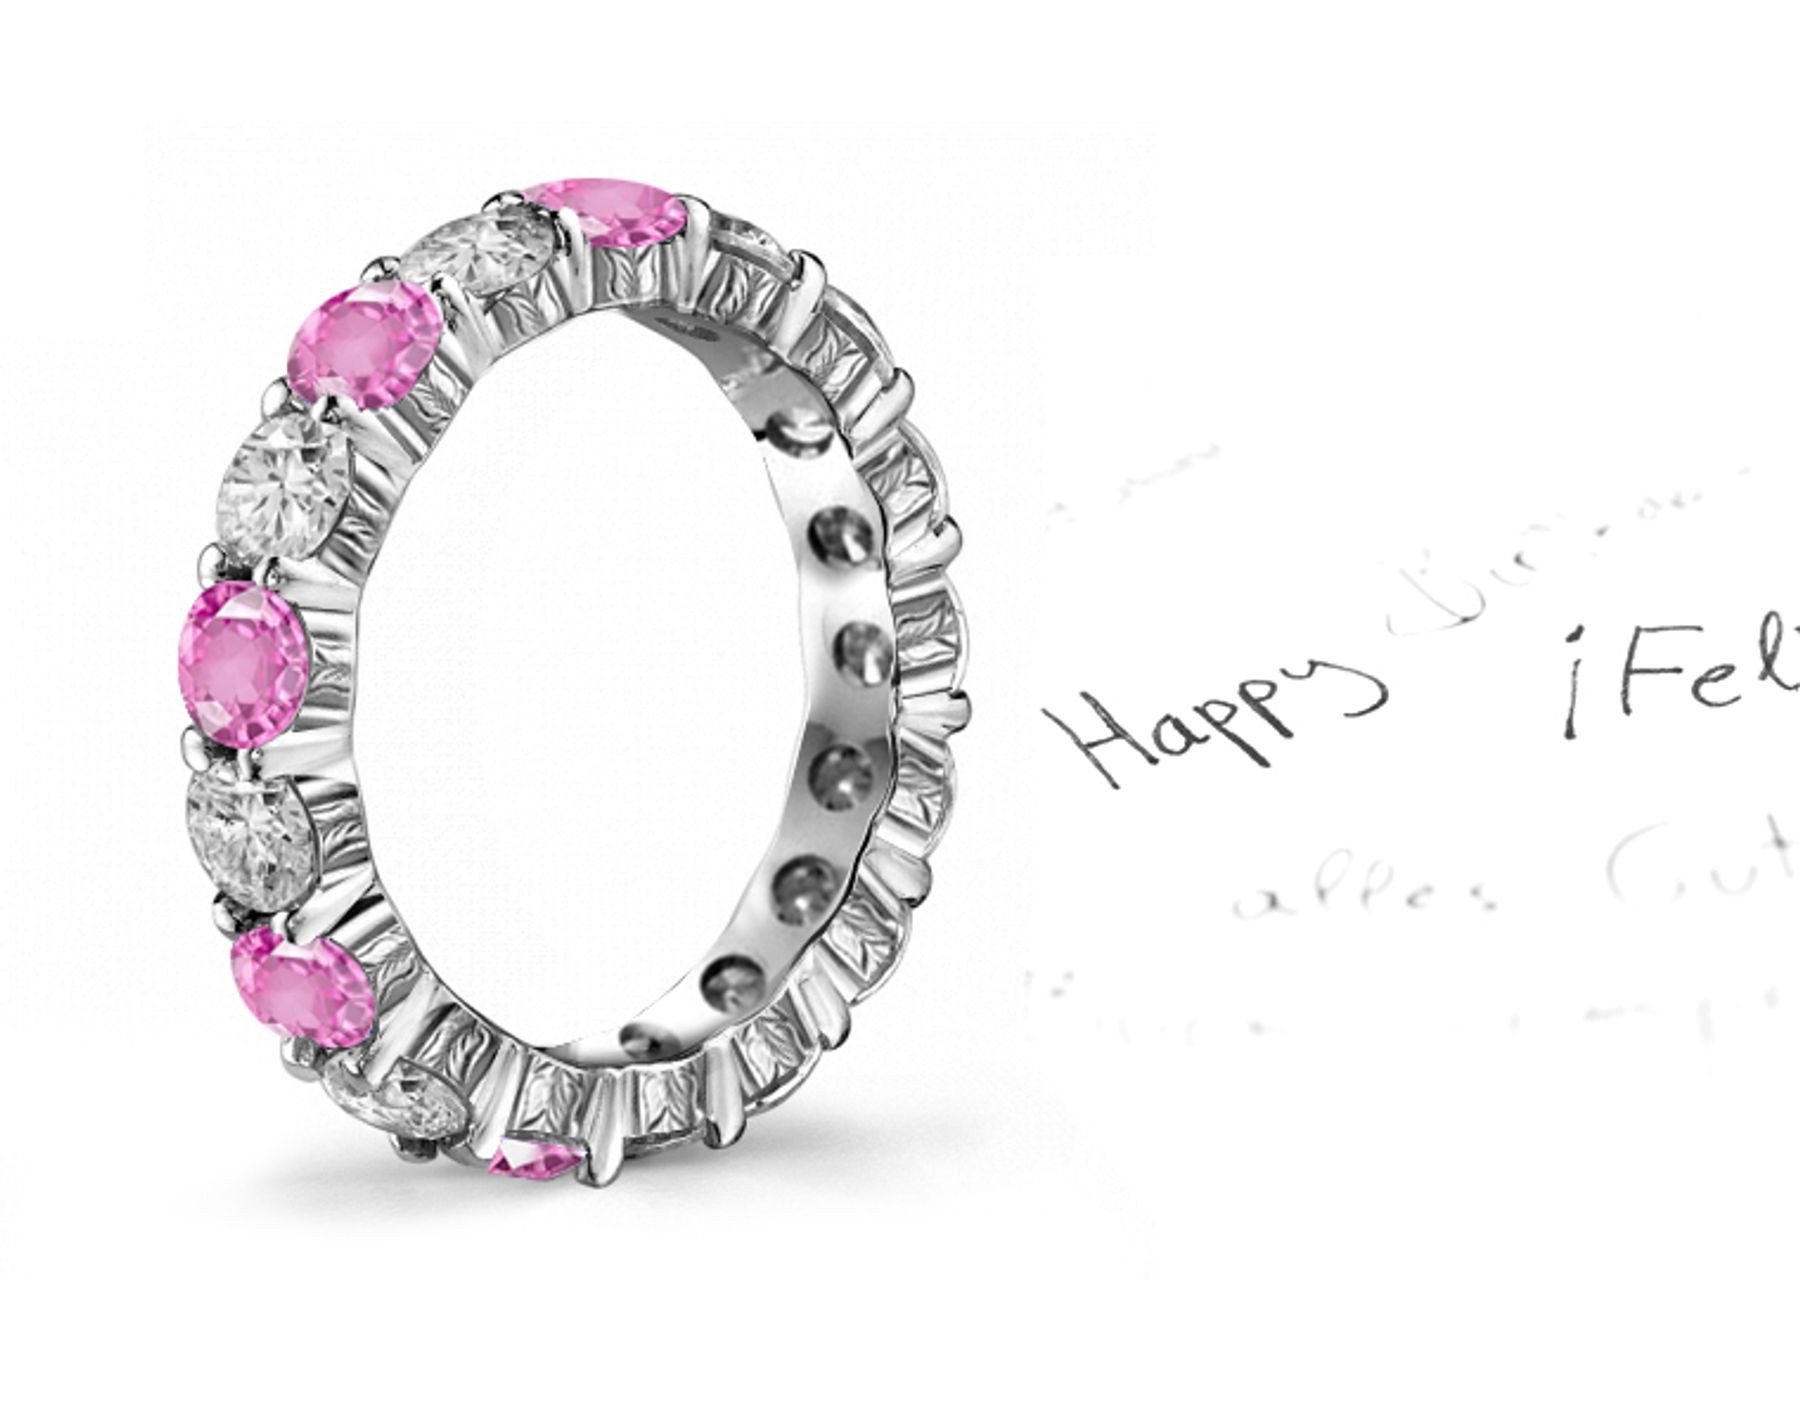 Engraved: Hand Crafted Pink Sapphire & Diamond Wedding Rings